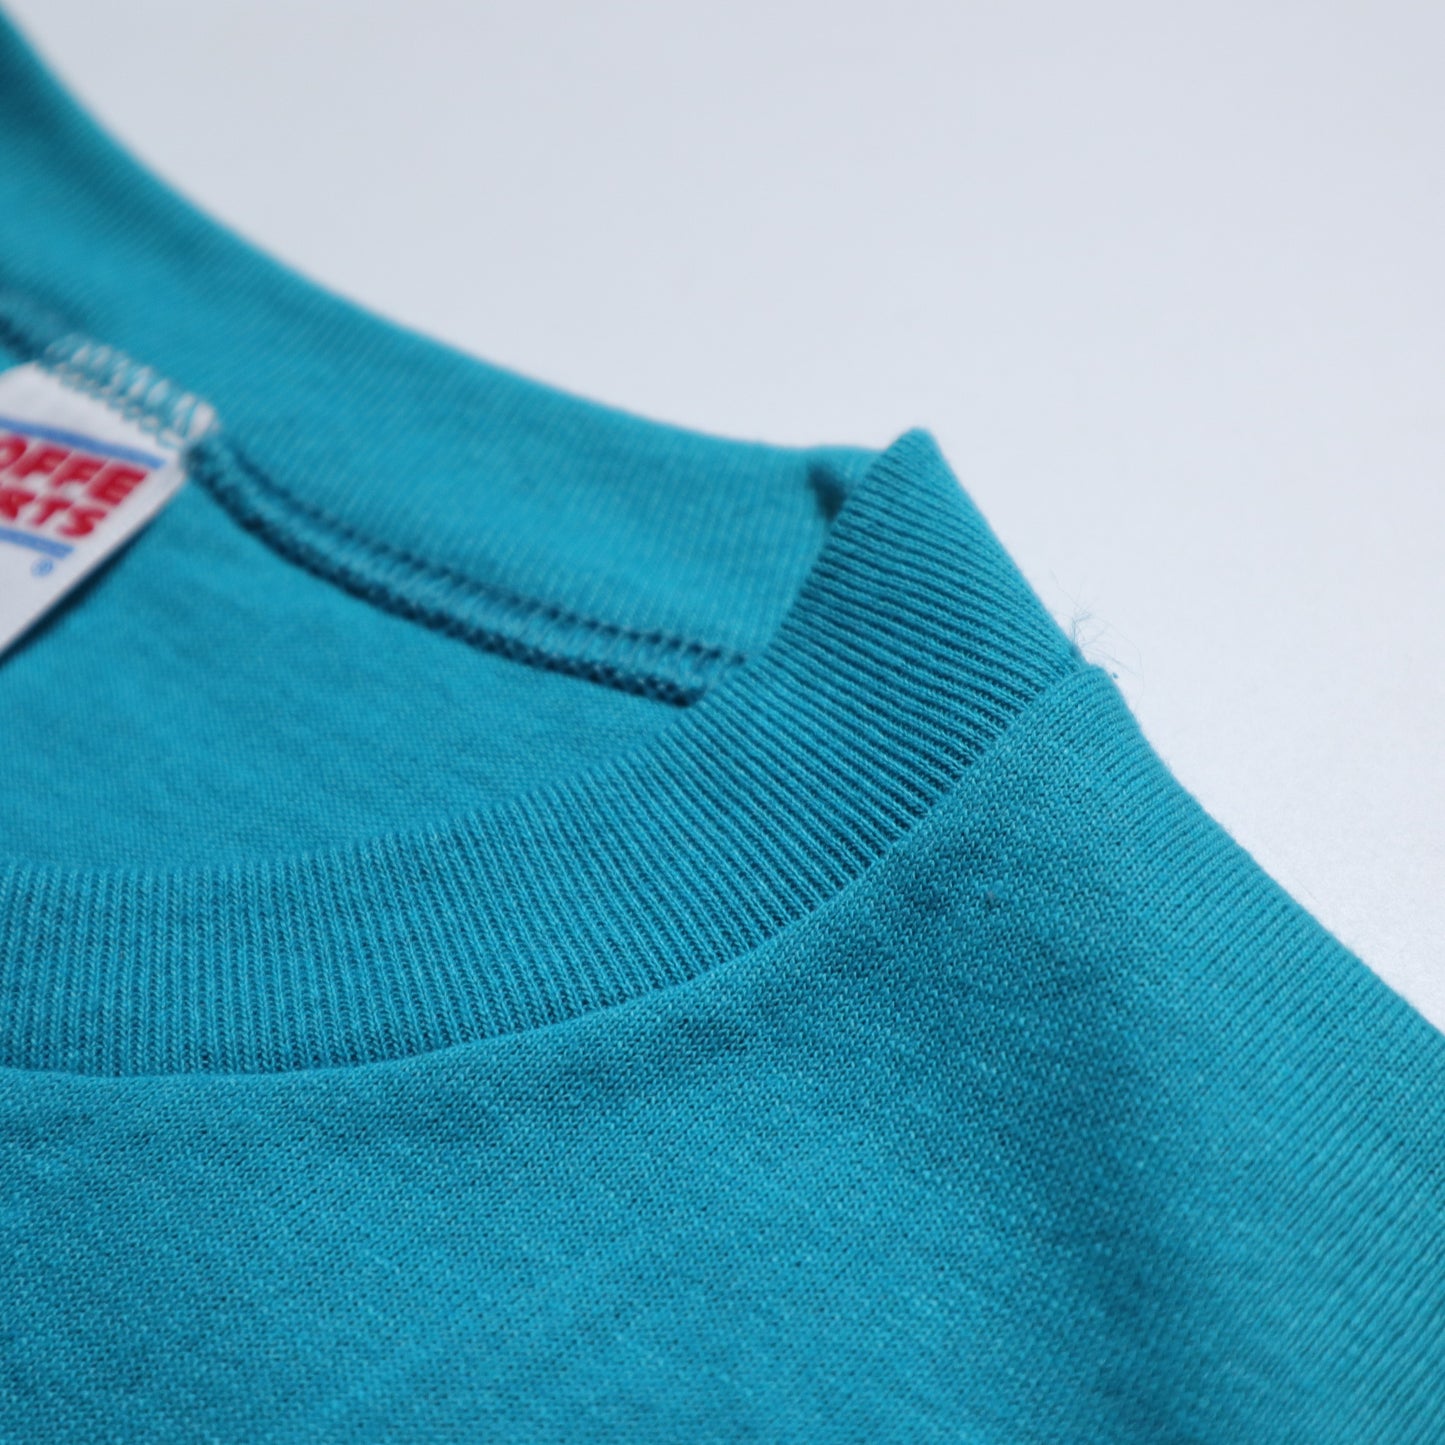 80/90s American-made SOFFE Shirts teal henley collar tee